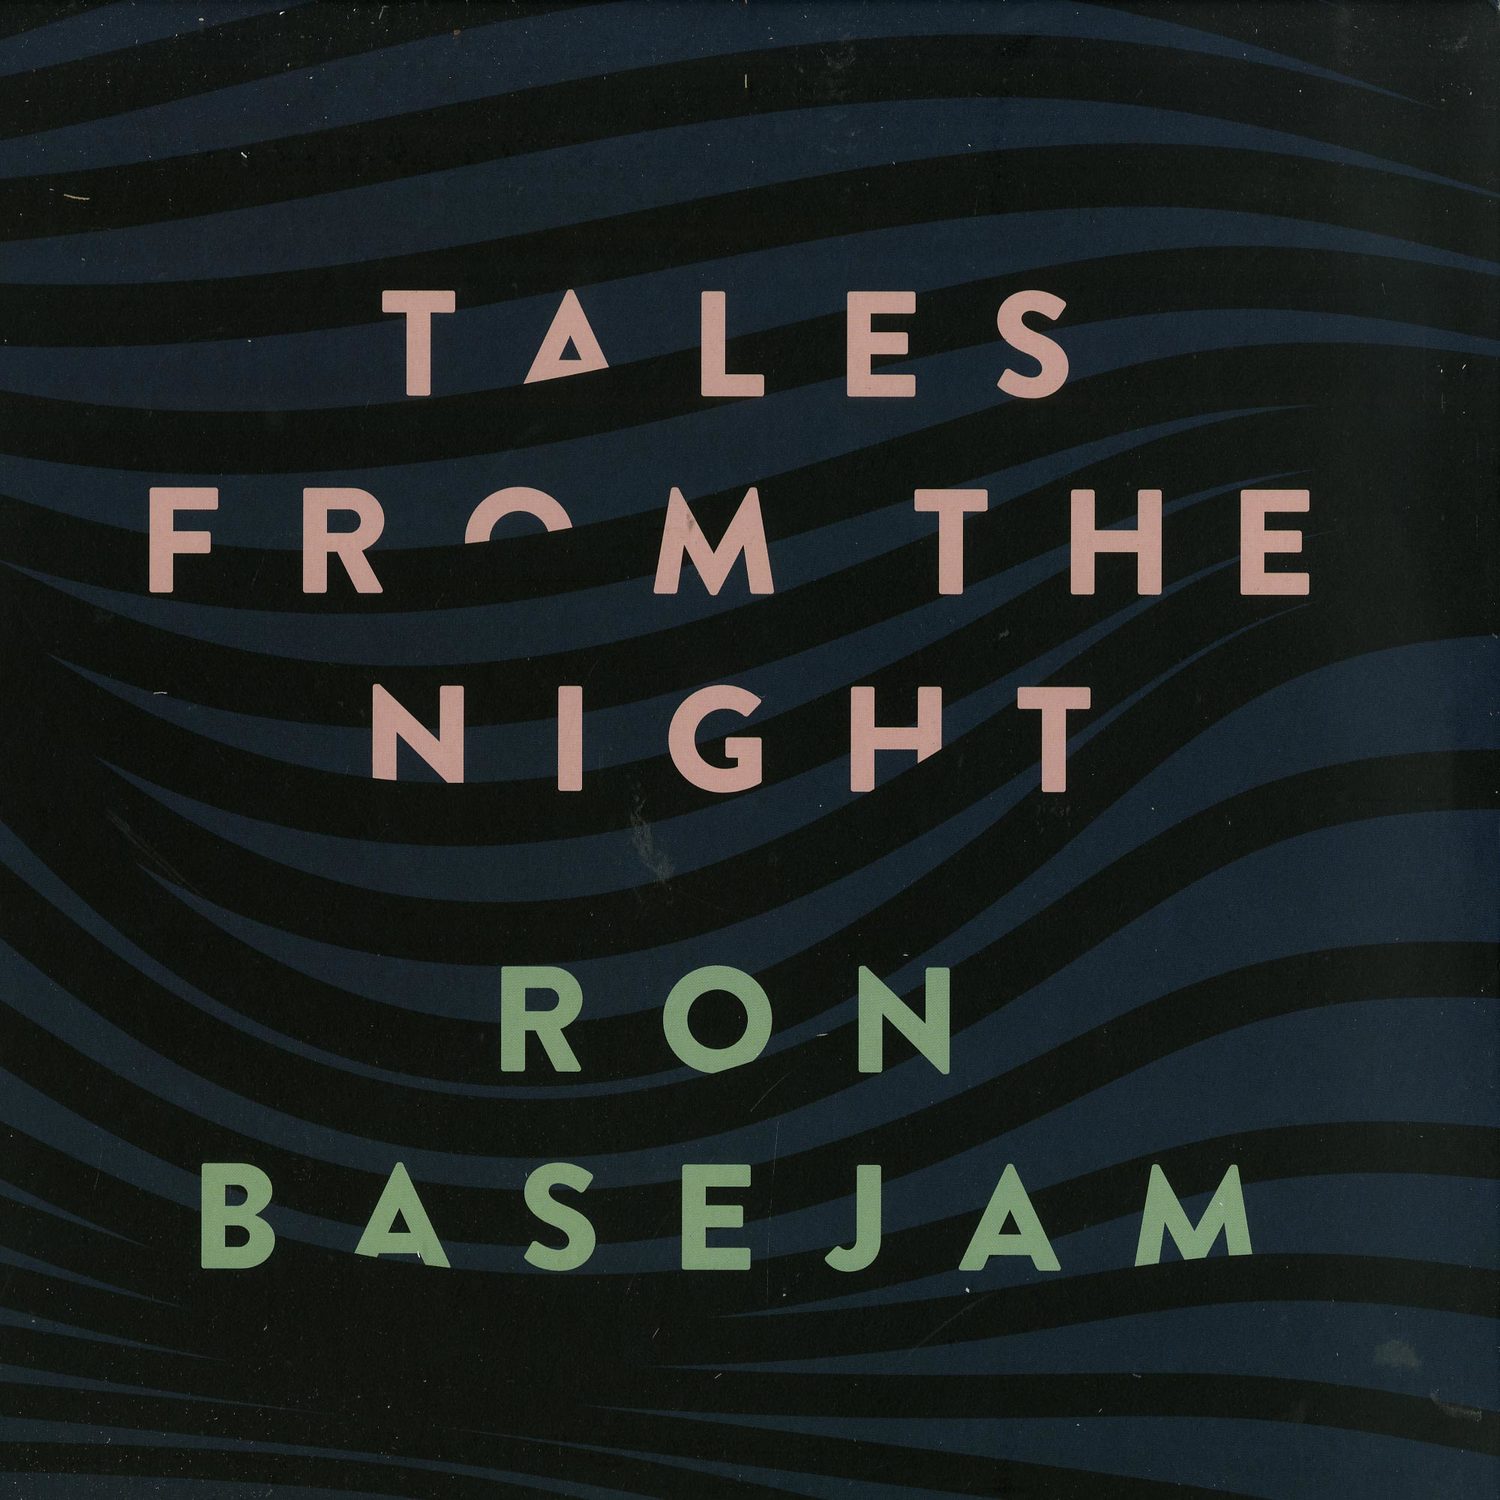 Ron Basejam - TALES FROM THE NIGHT EP